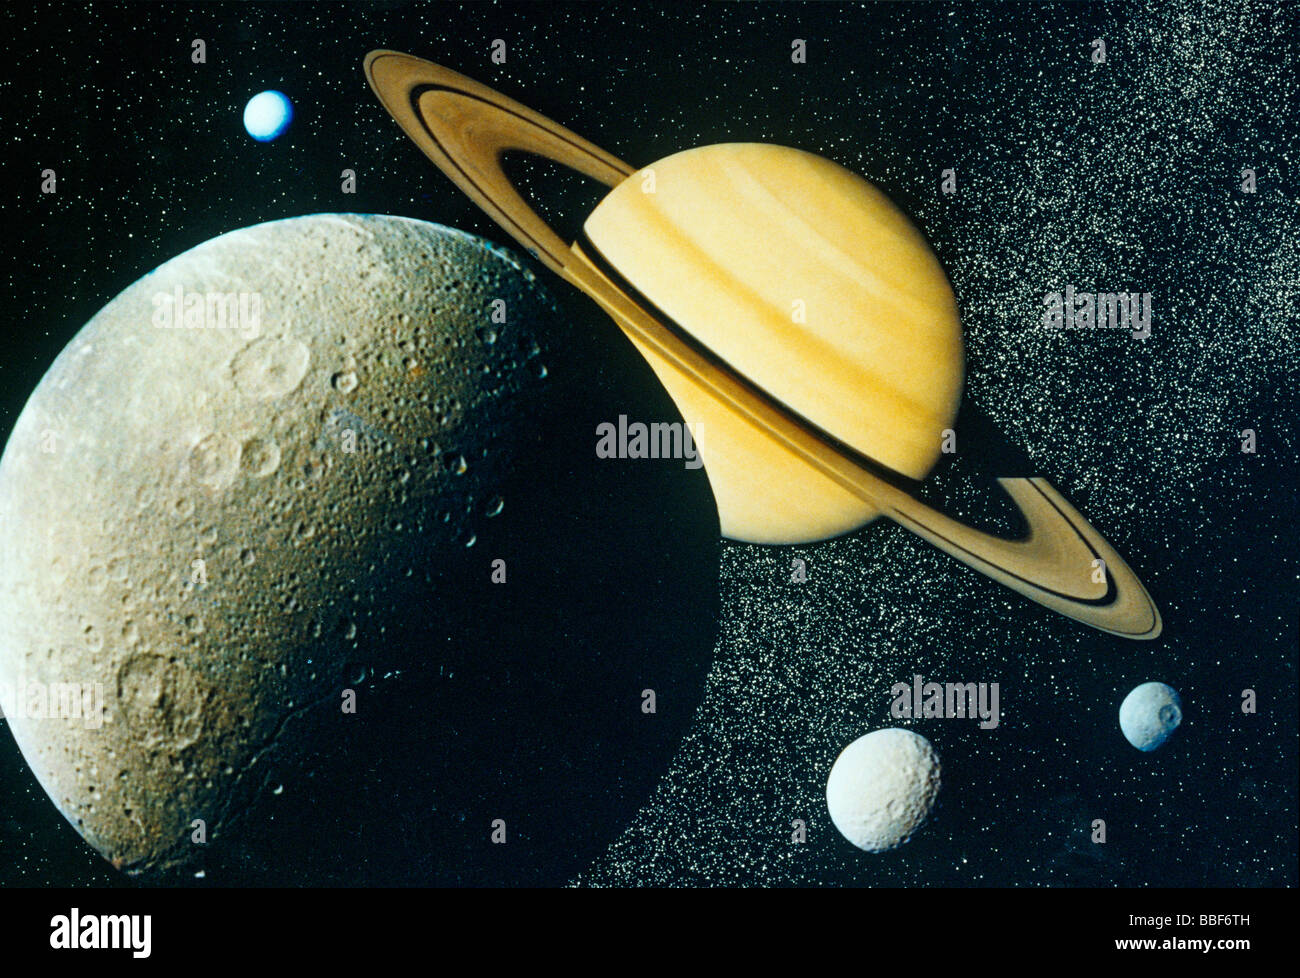 art work saturn and moons Stock Photo